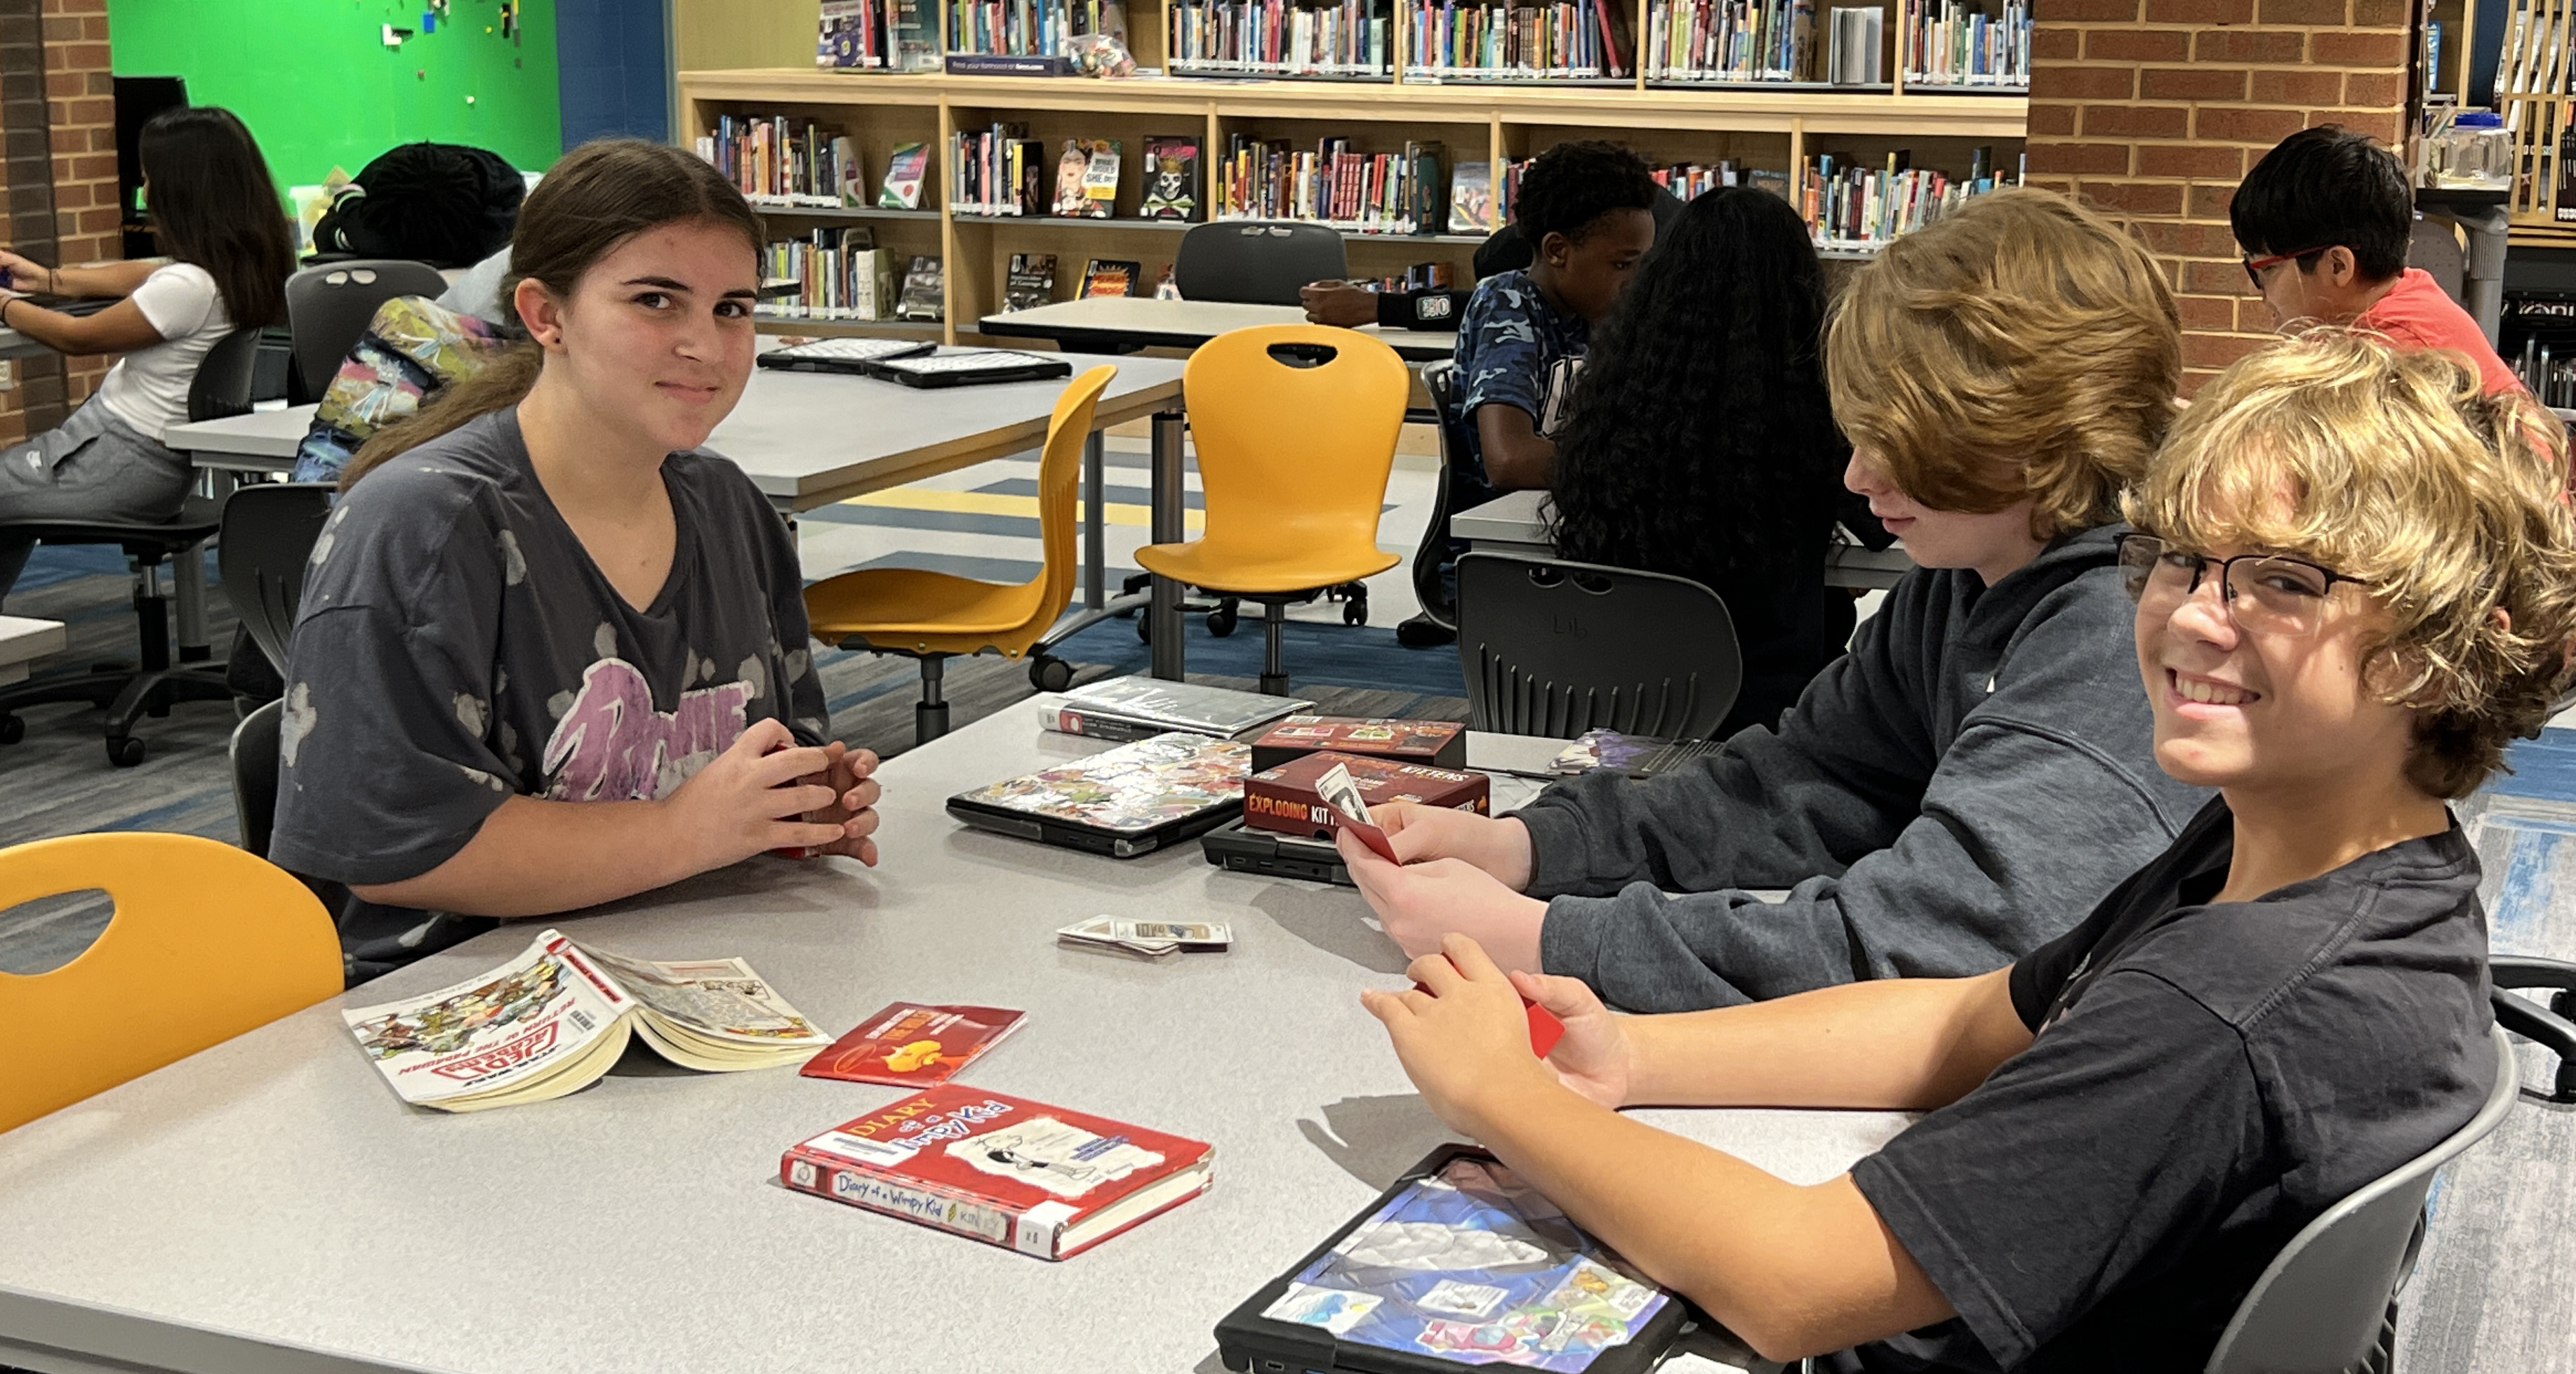 Students playing a card game in the school library